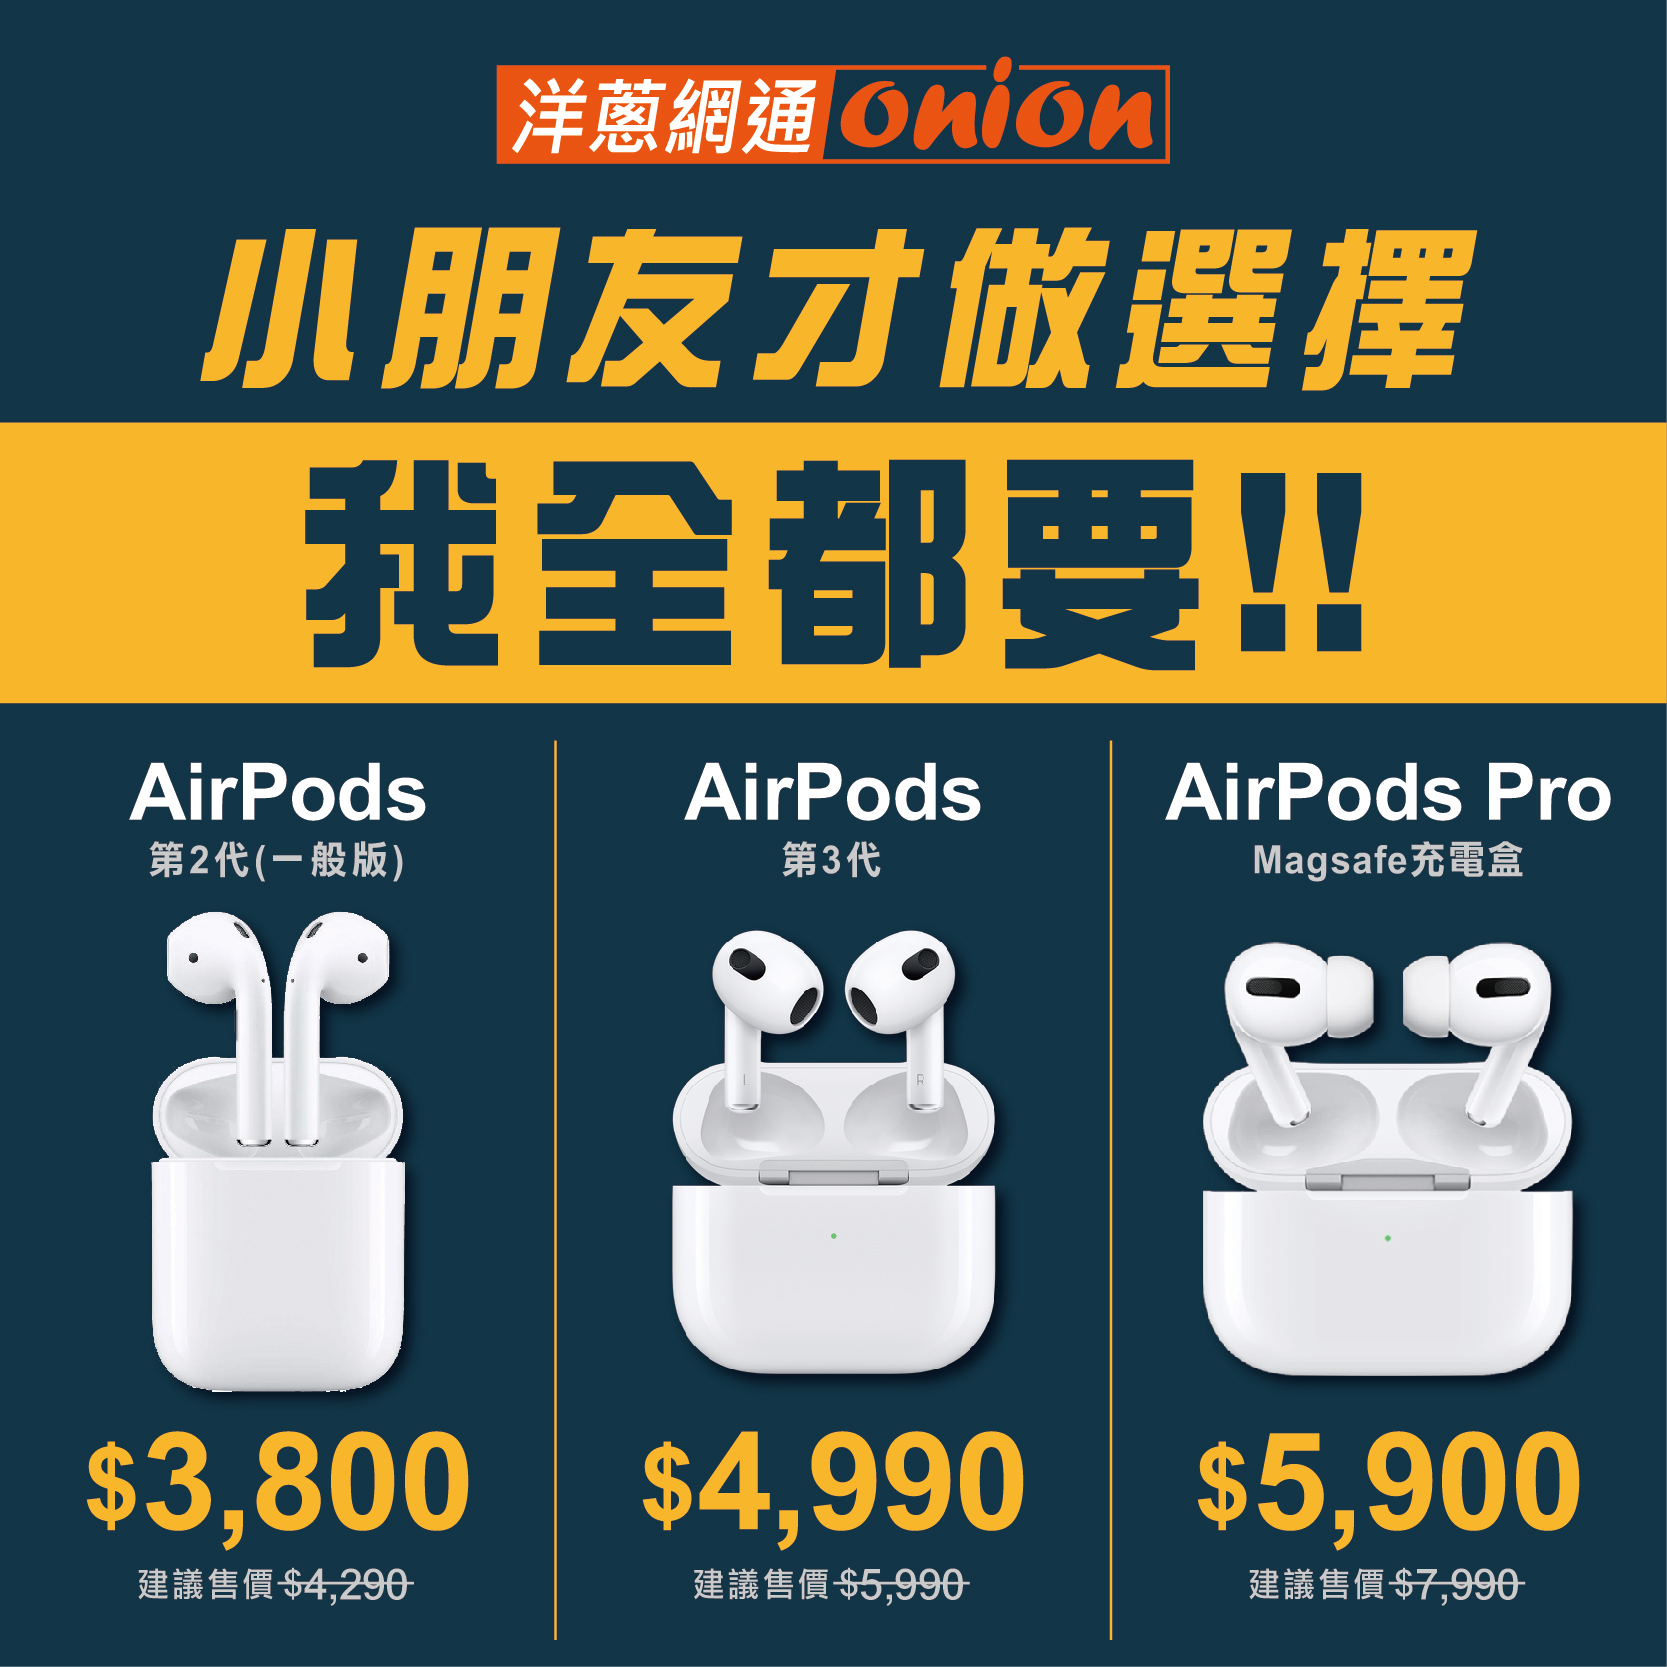 airpods pro價格